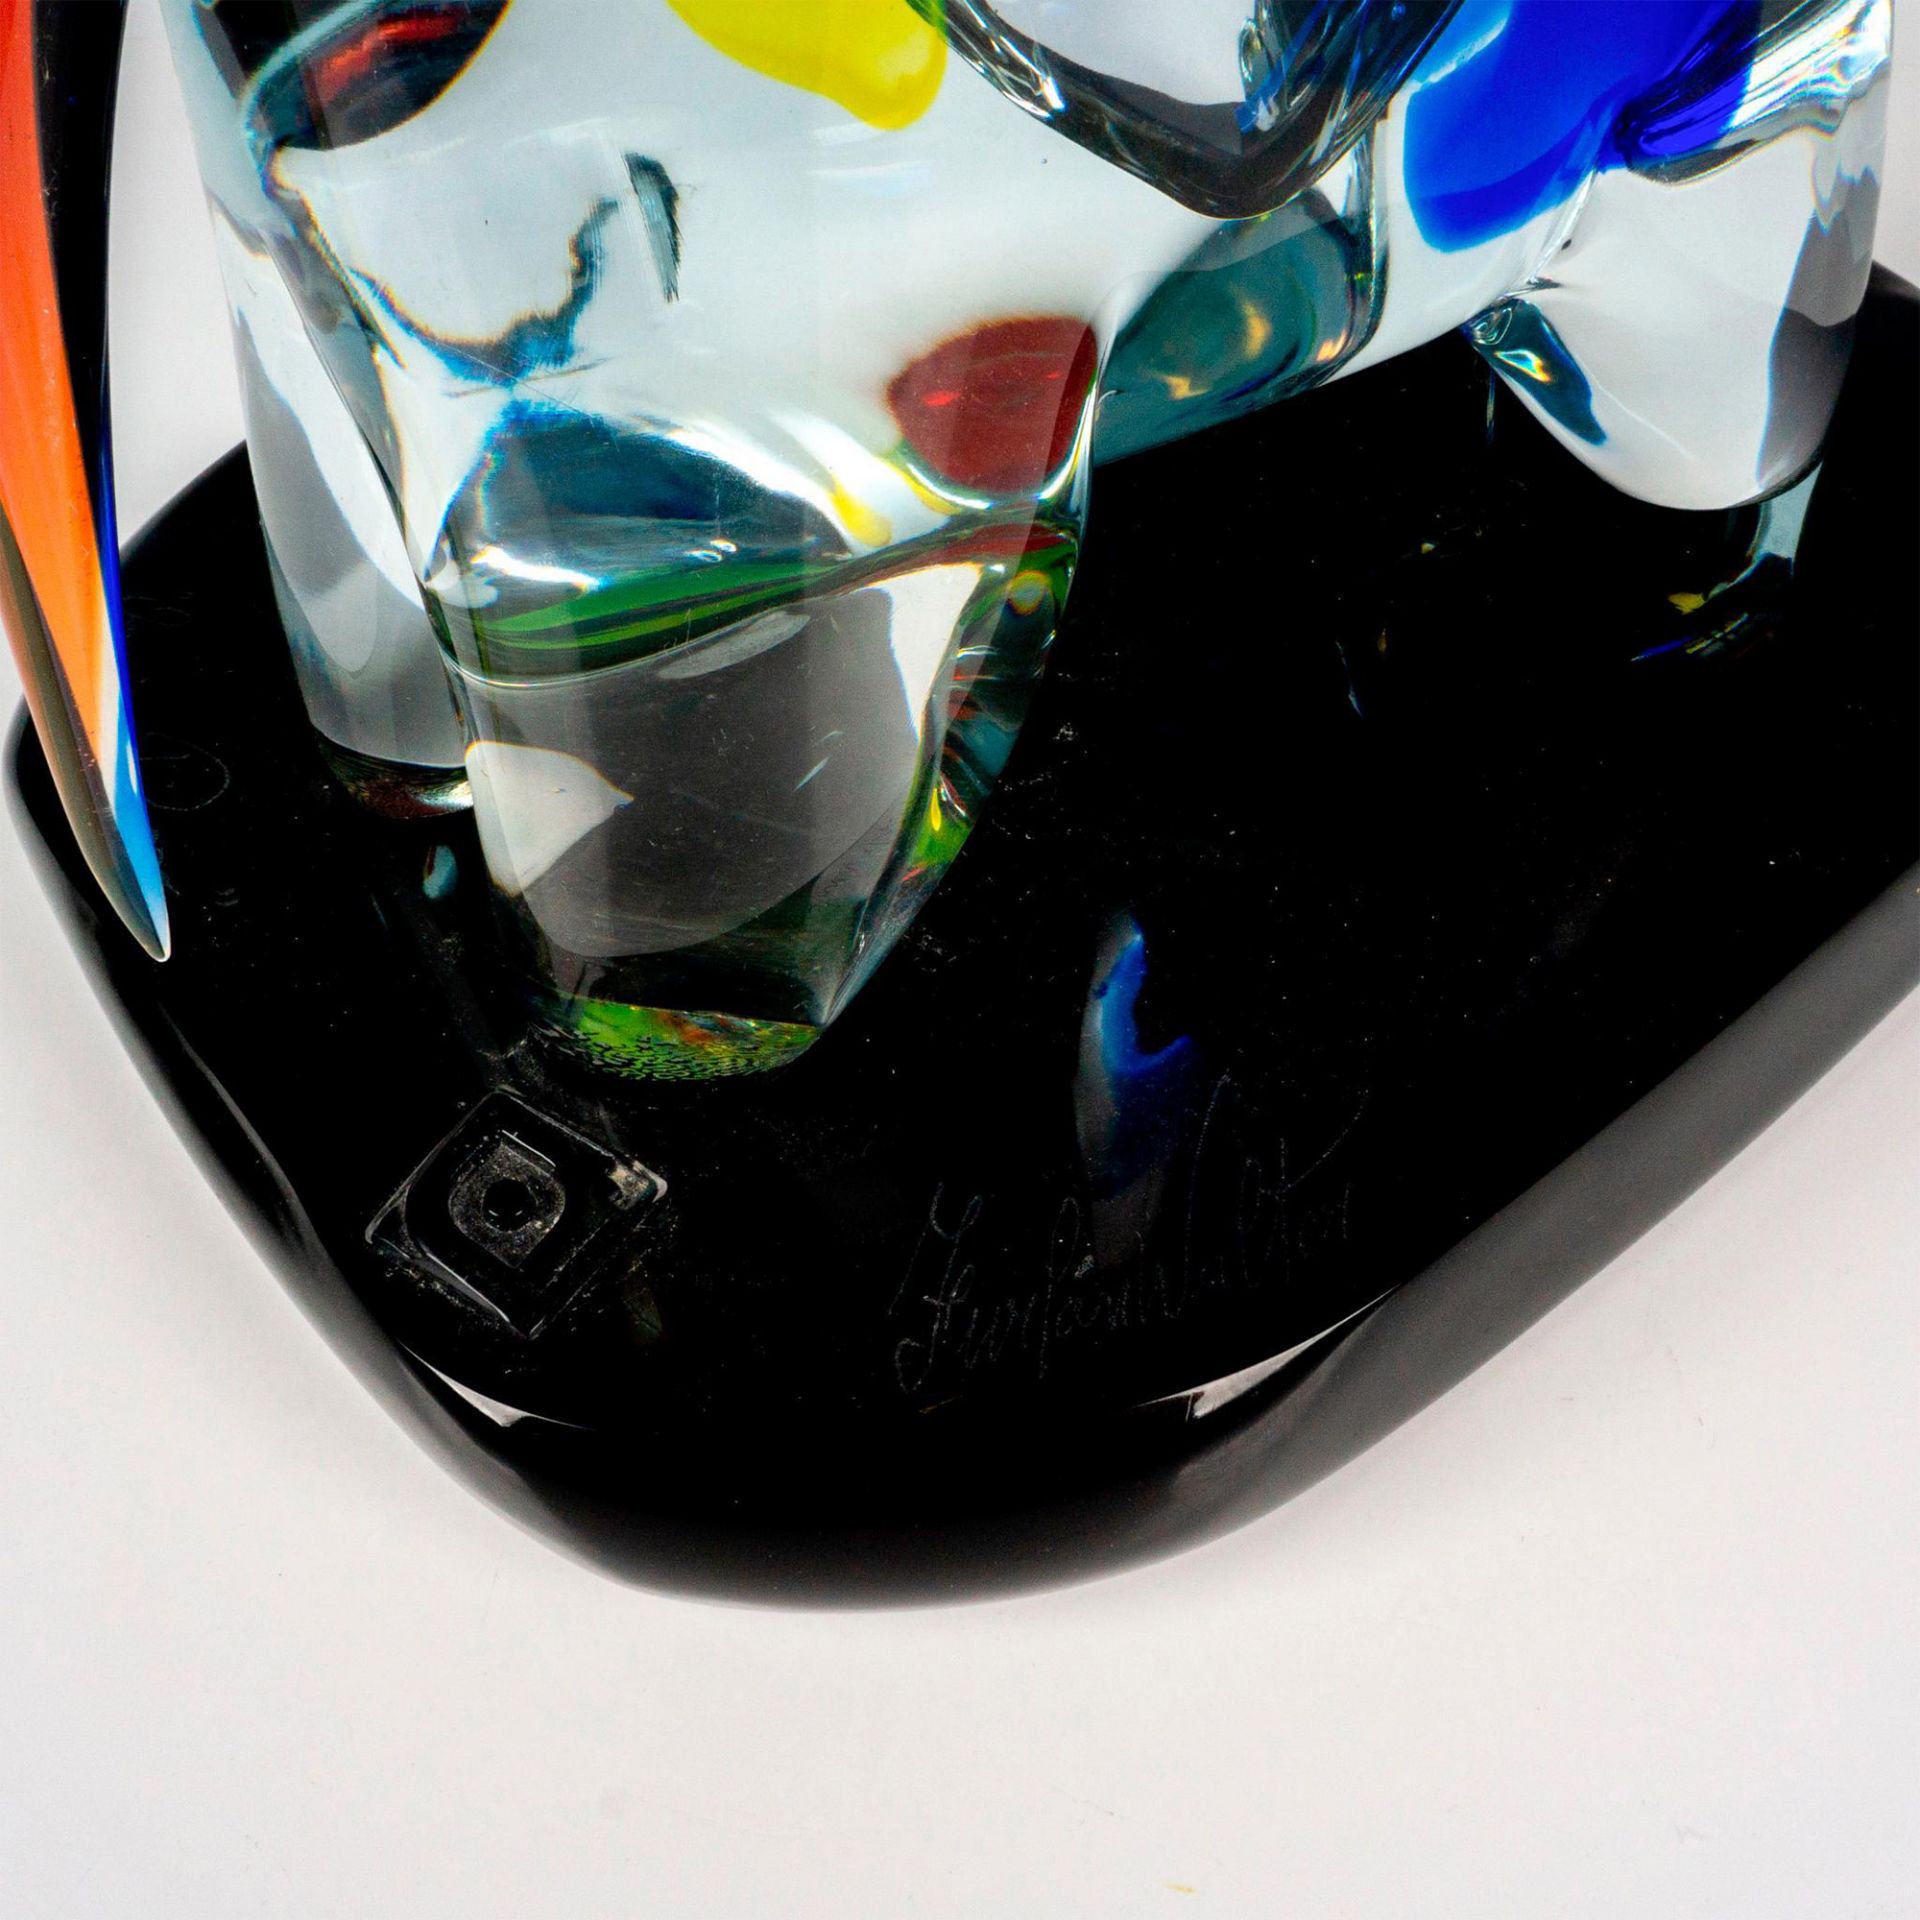 Murano Glass by Walter Furlan Sculpture, Toretto Signed - Image 6 of 8